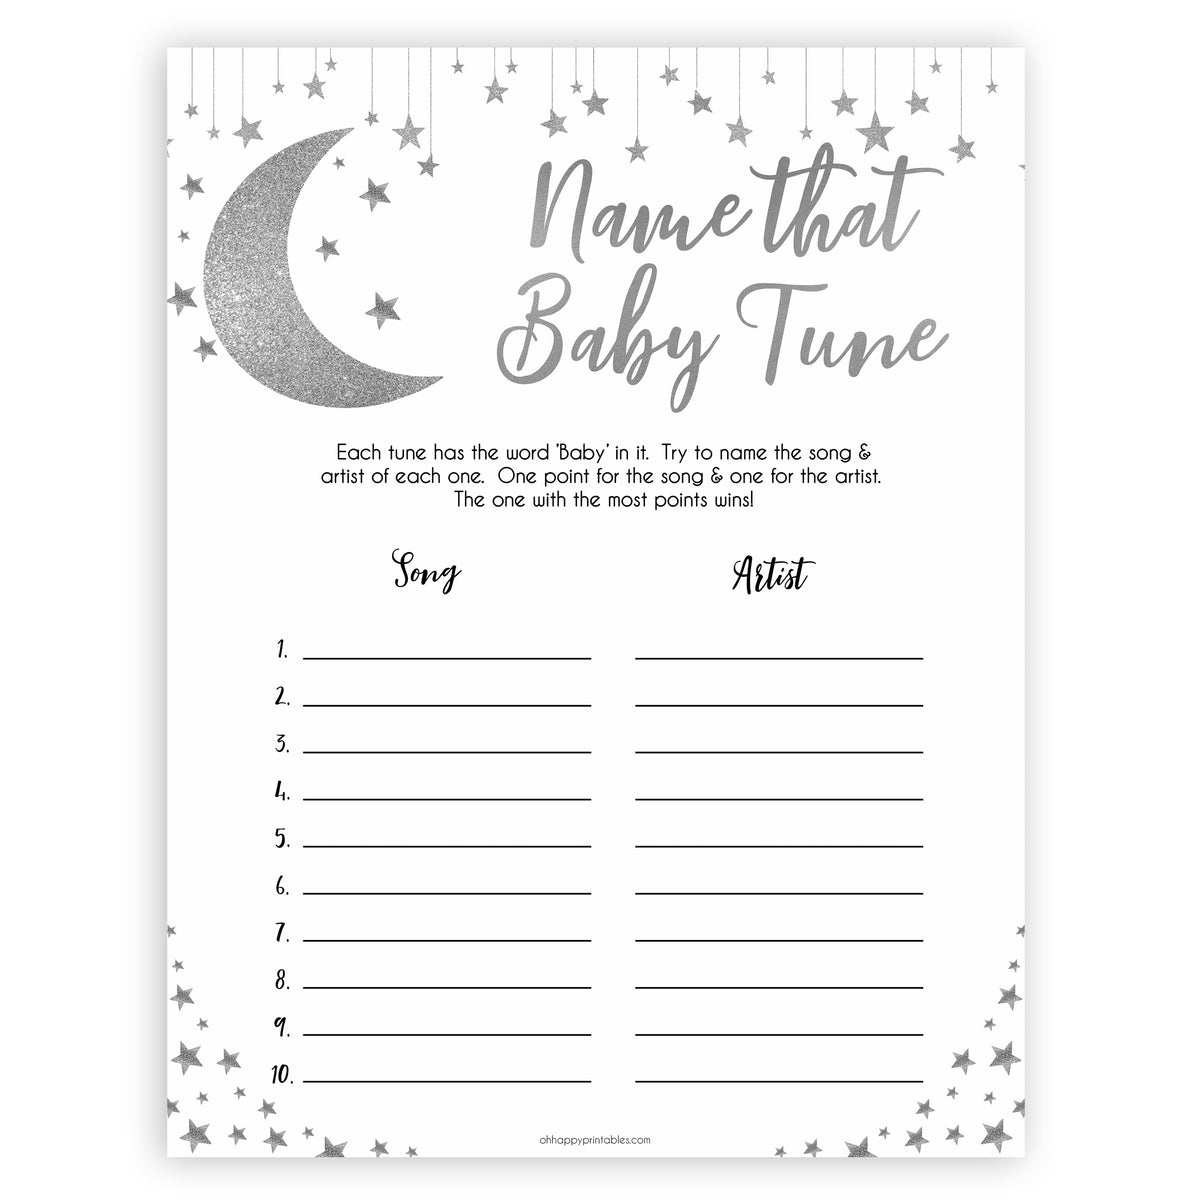 Silver little star, name that baby tune baby games, baby shower games, printable baby games, fun baby games, twinkle little star games, baby games, fun baby shower ideas, baby shower ideas